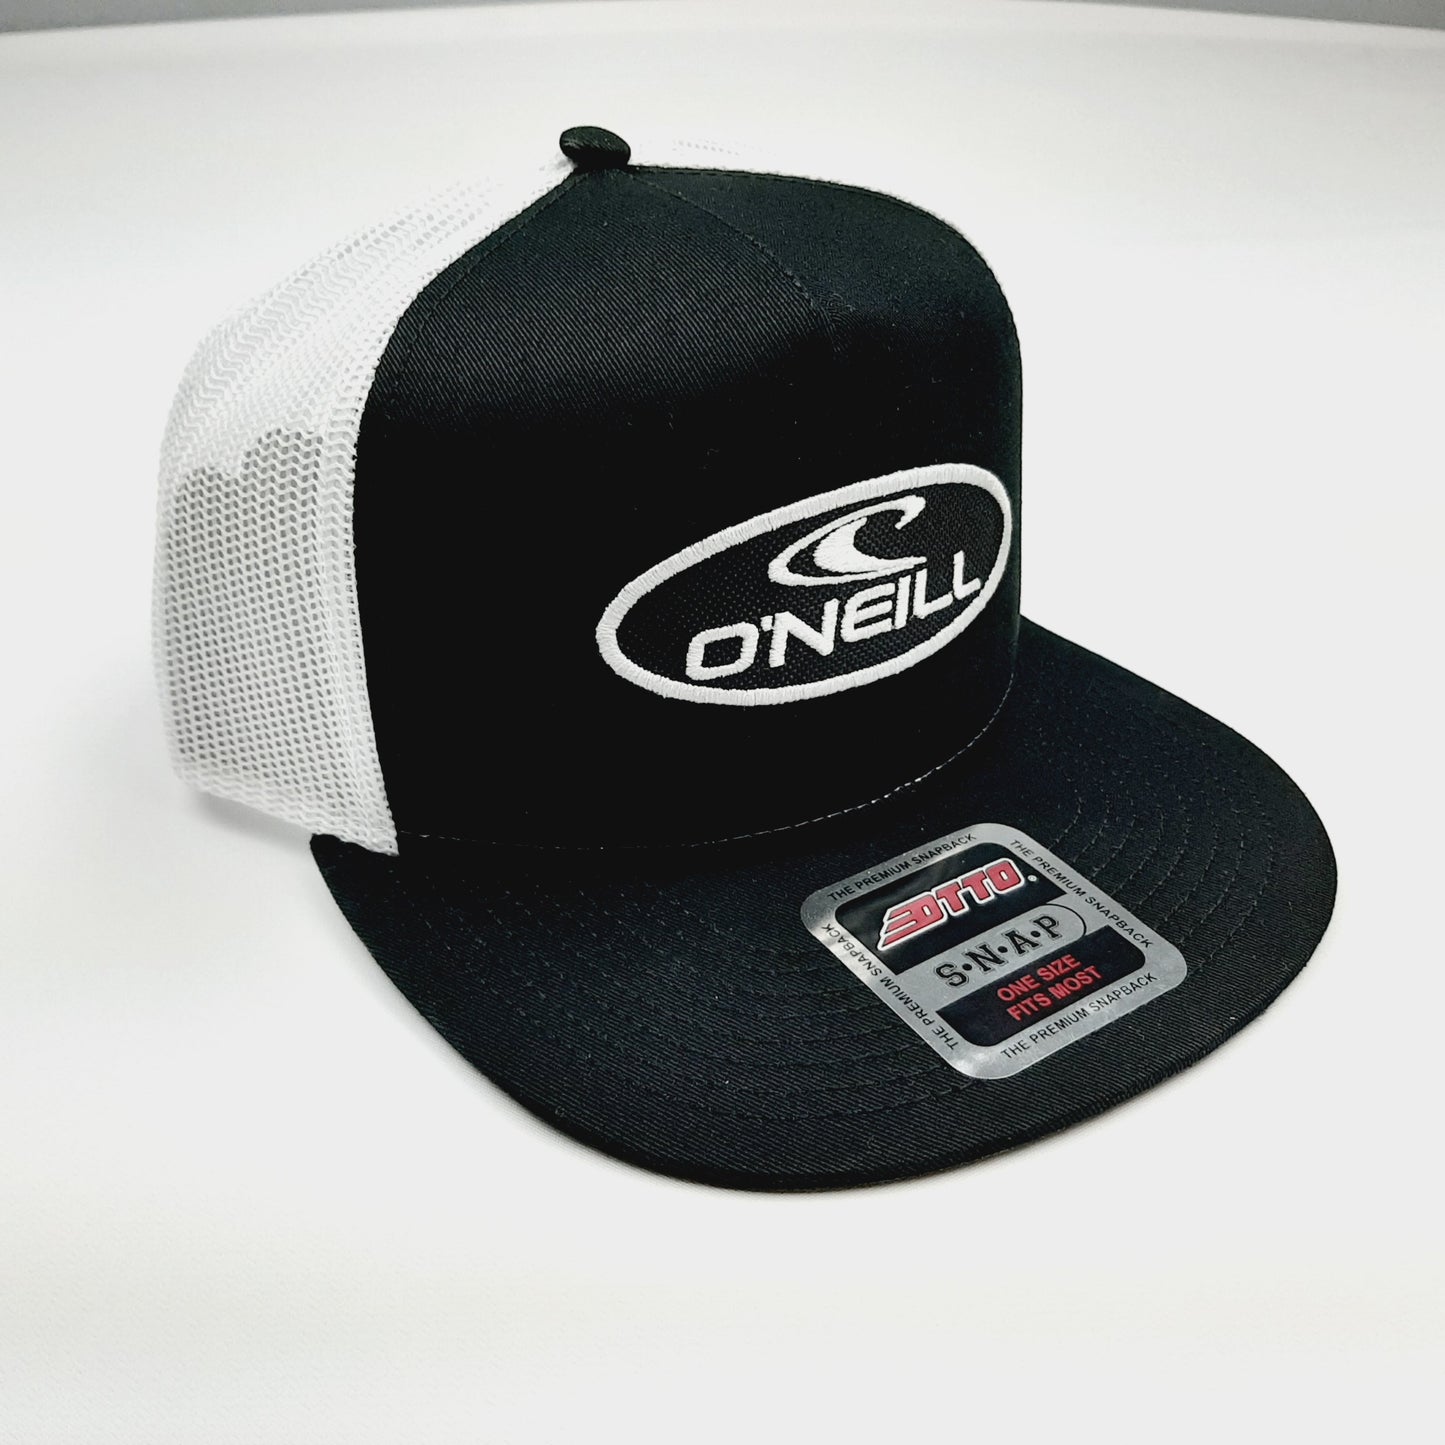 O'Neill Surf Co.Embroidered Oval Patch Flat Bill Snapback Mesh Hat Cap OTTO